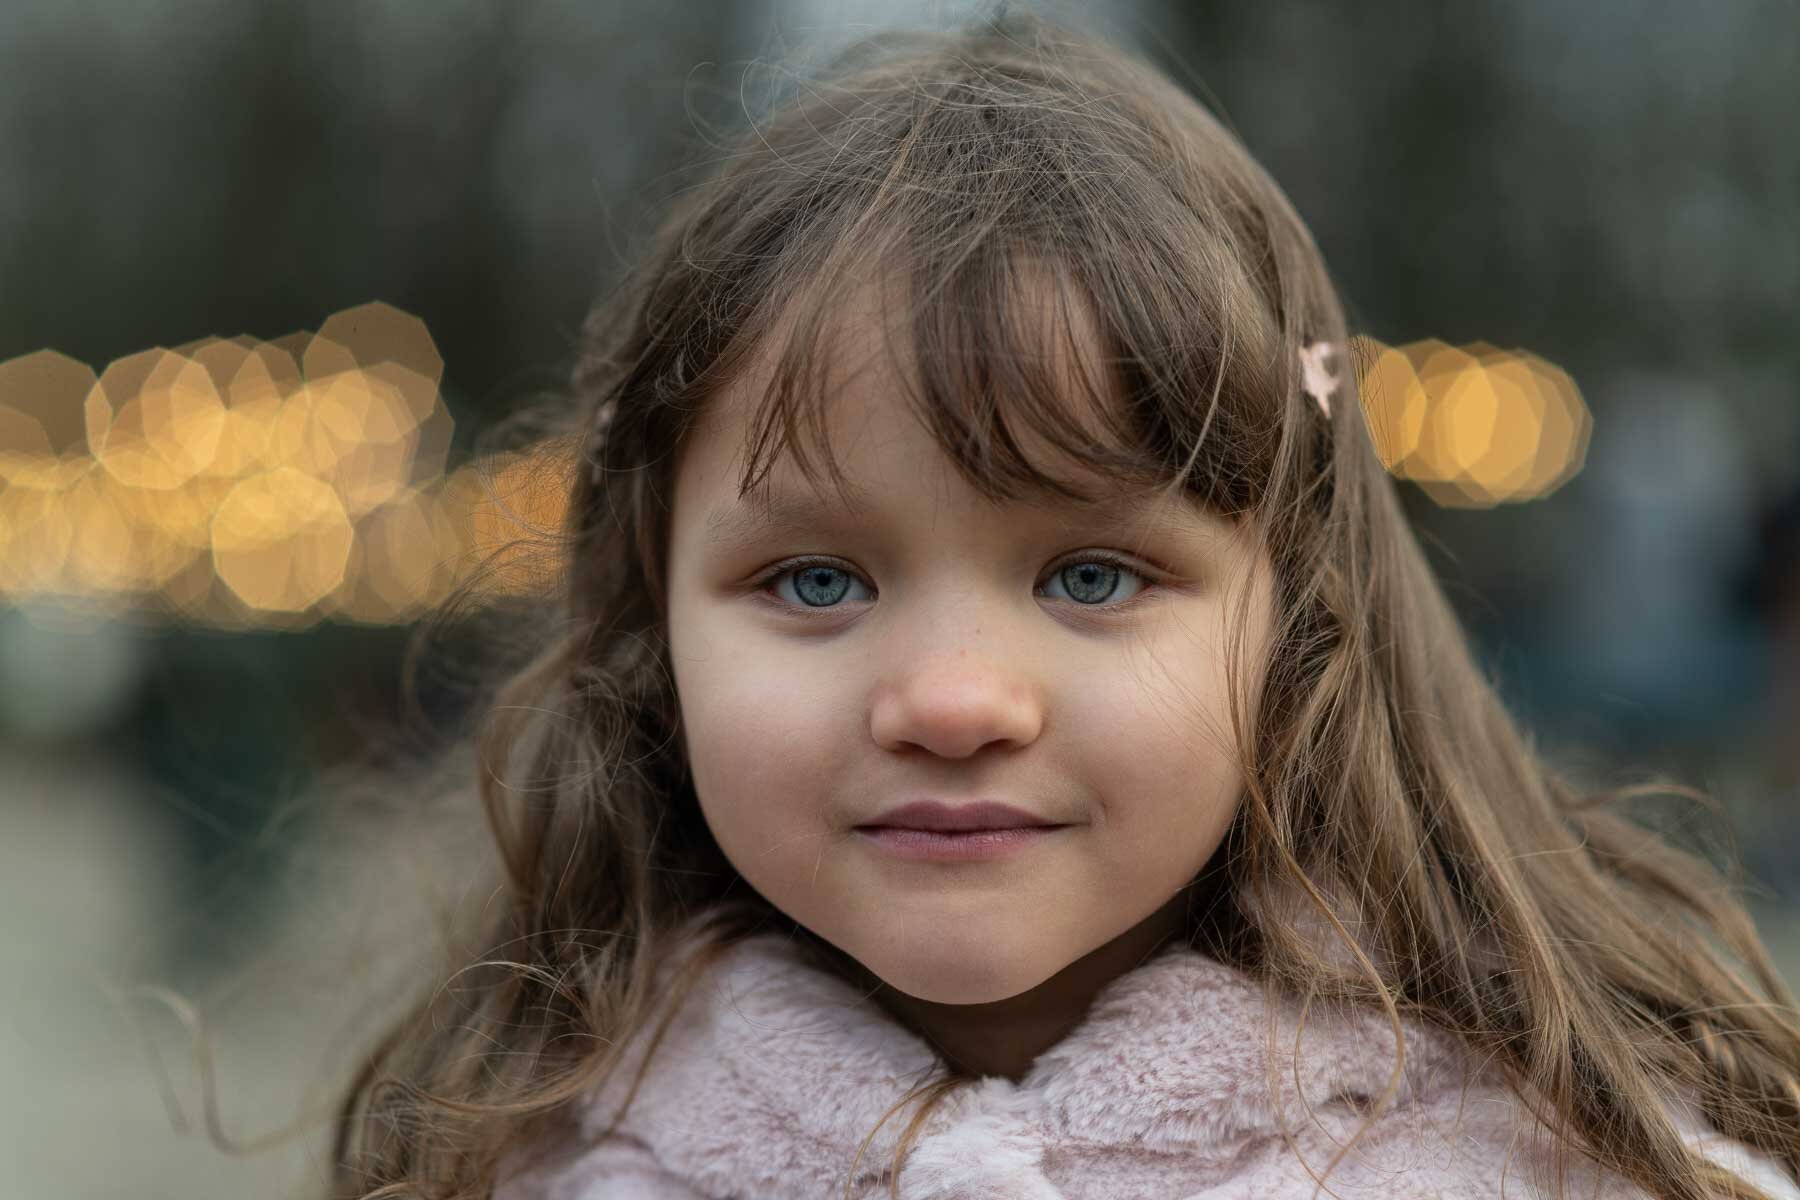  I met this little girl and her mother in Brussels’ parc royal just before Christmas to make photographs for her family. We stopped off at the guinguette for her to have a cup of hot chocolate. 